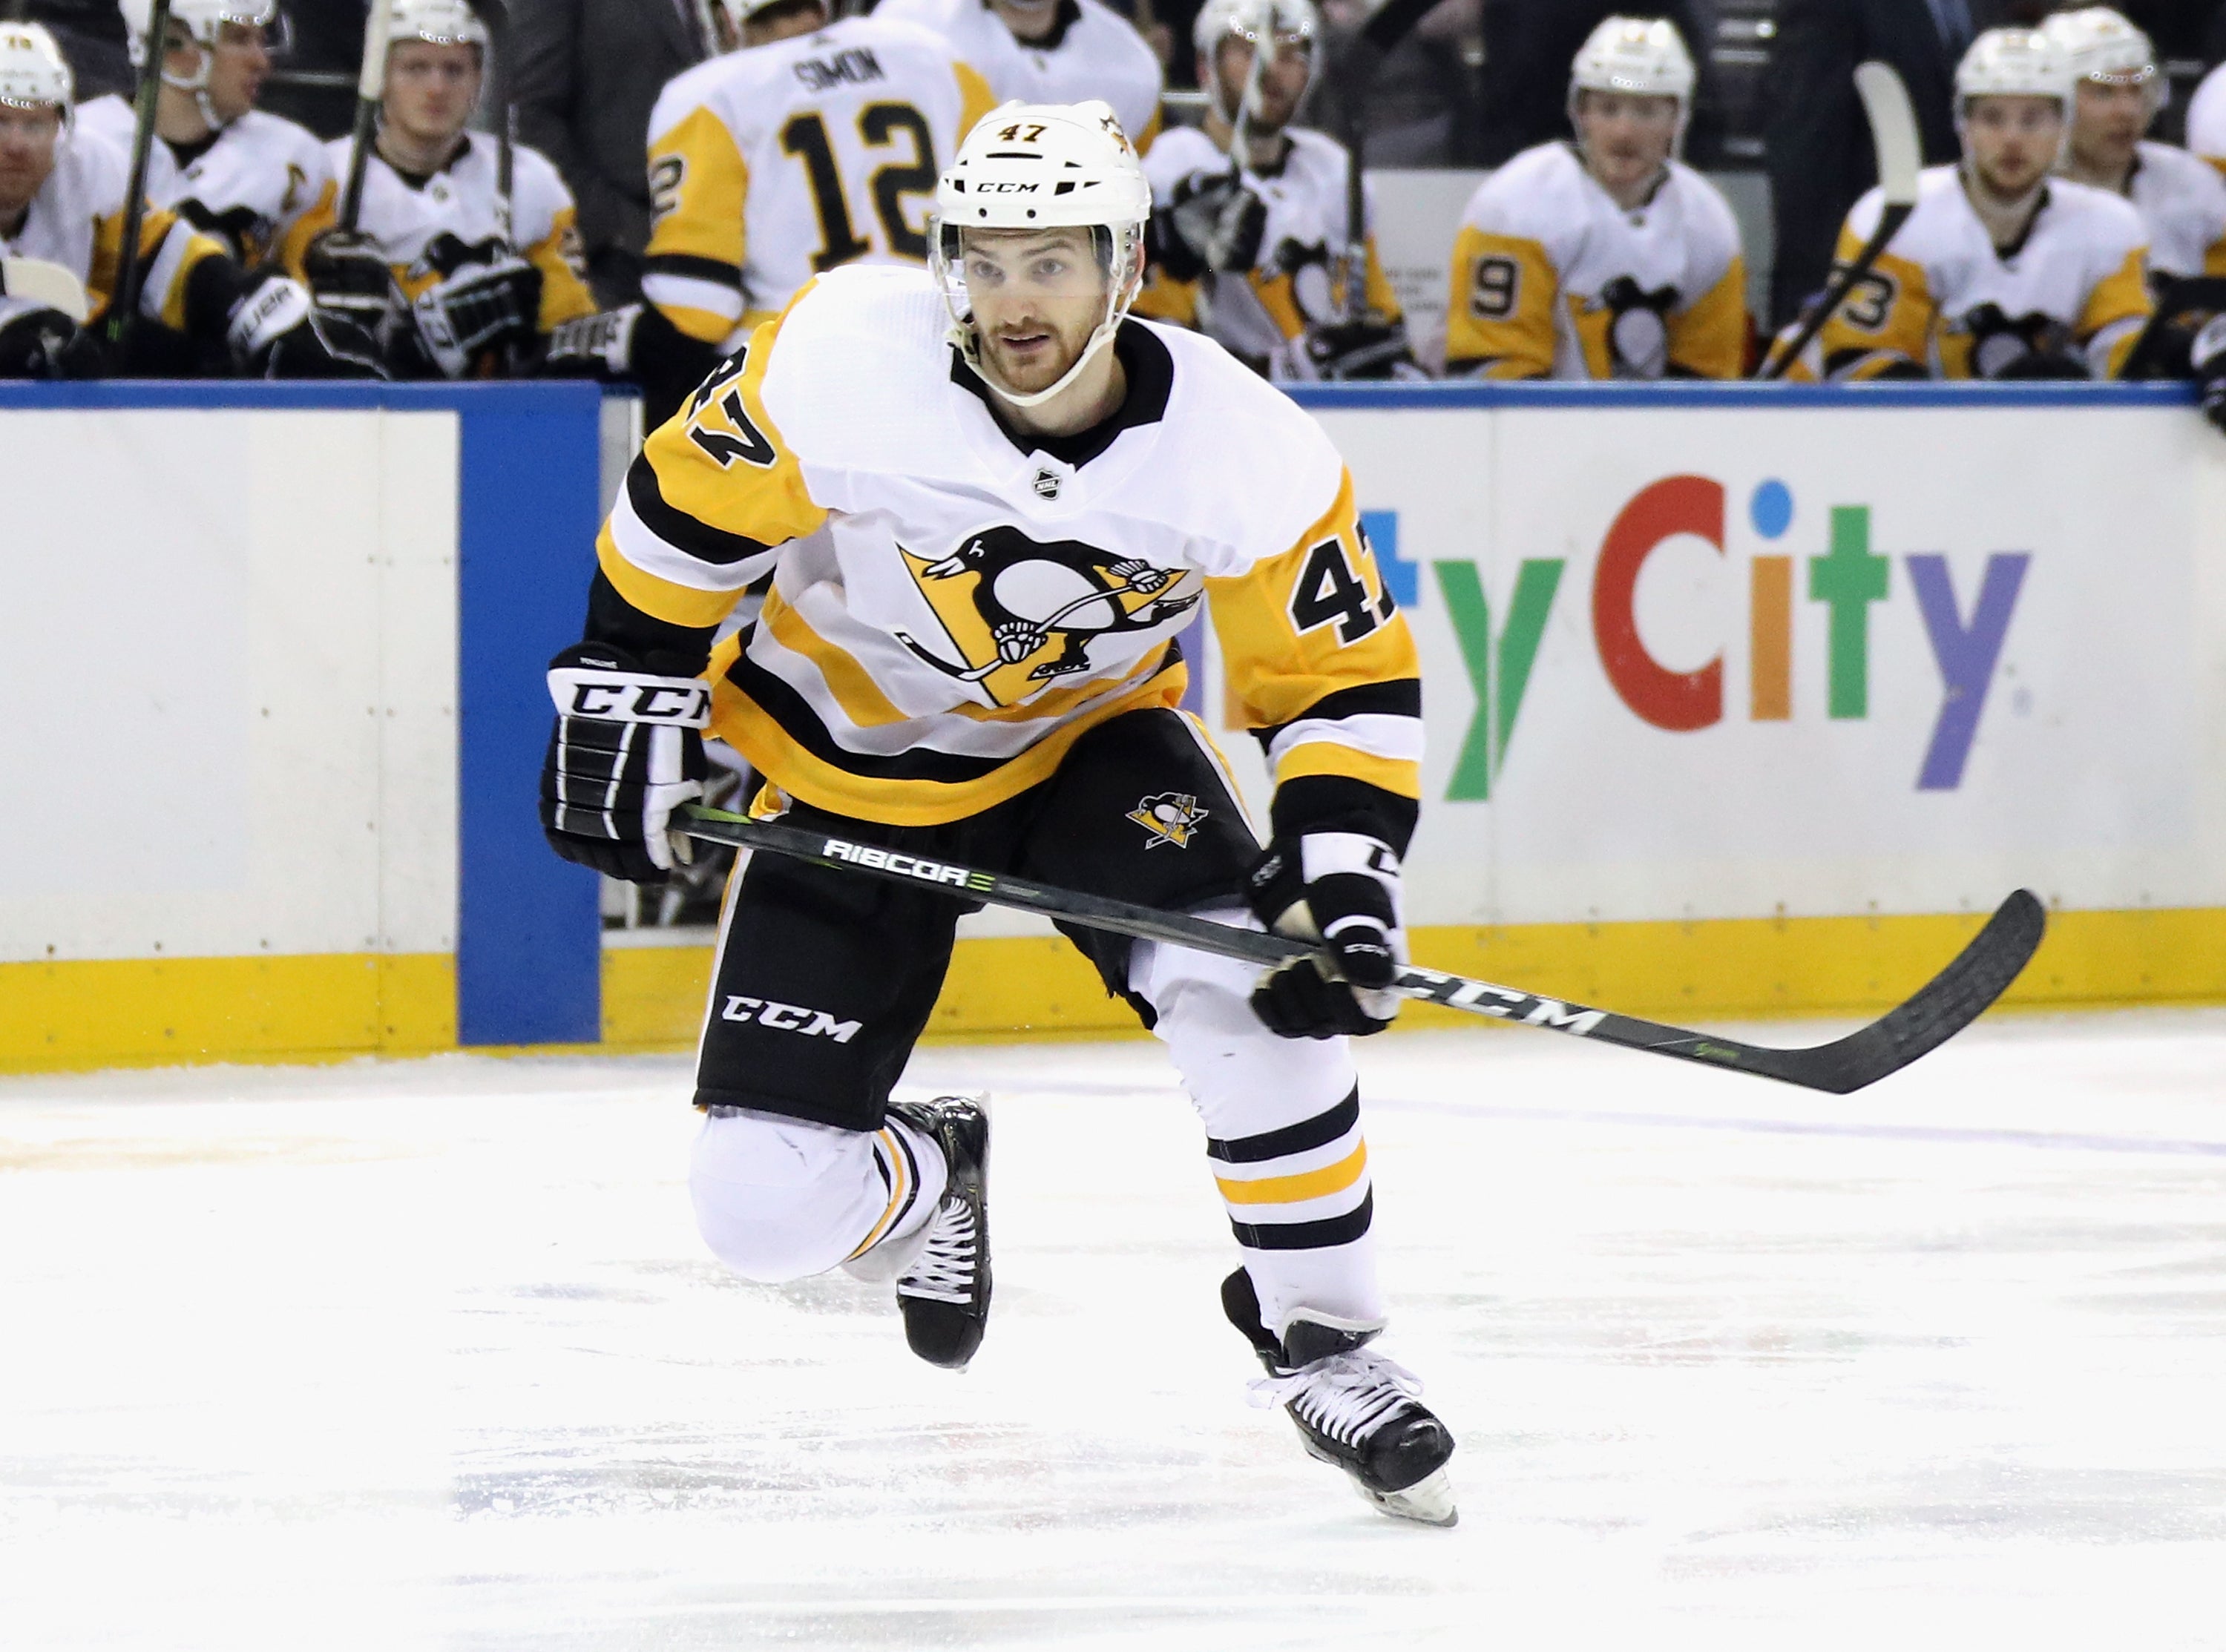 Adam Johnson played for the Pittsburgh Penguins in the US before moving to England